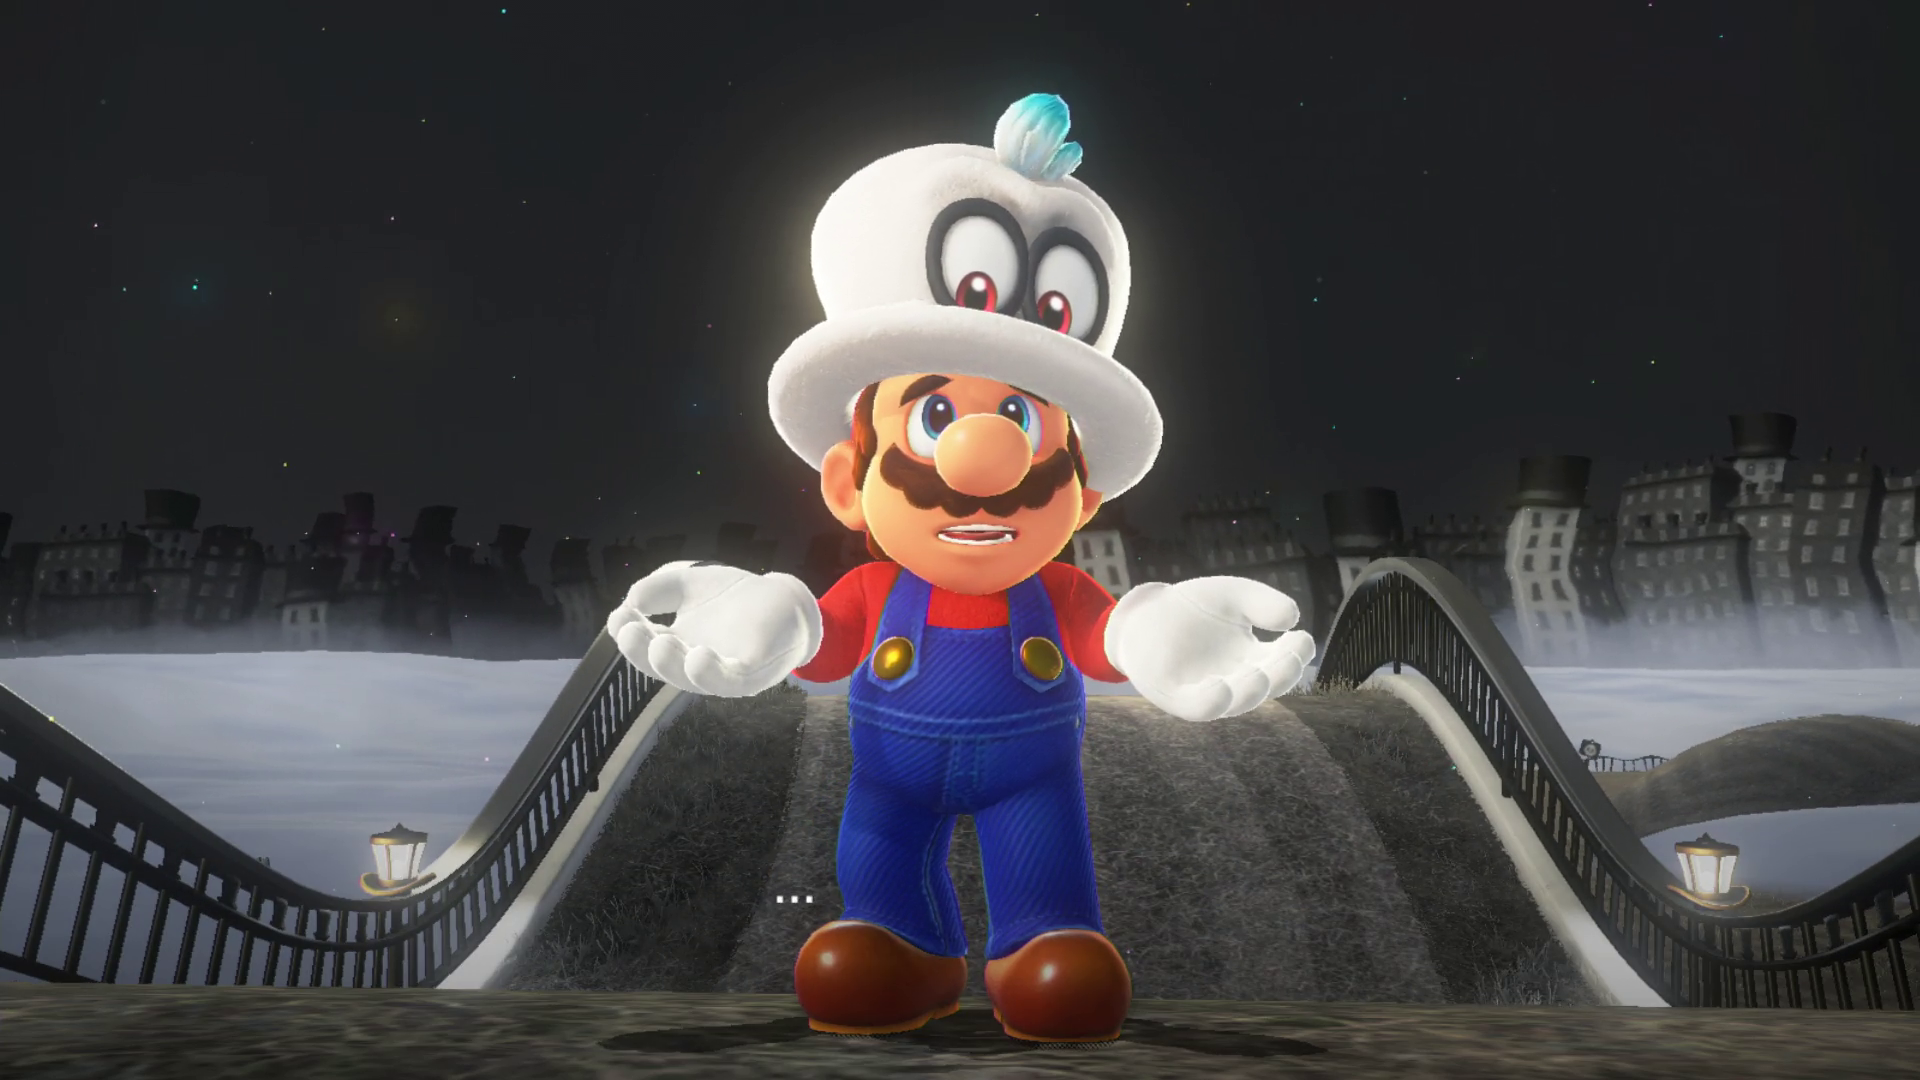 Image for Nintendo and the studio behind Despicable Me are making an animated Mario movie